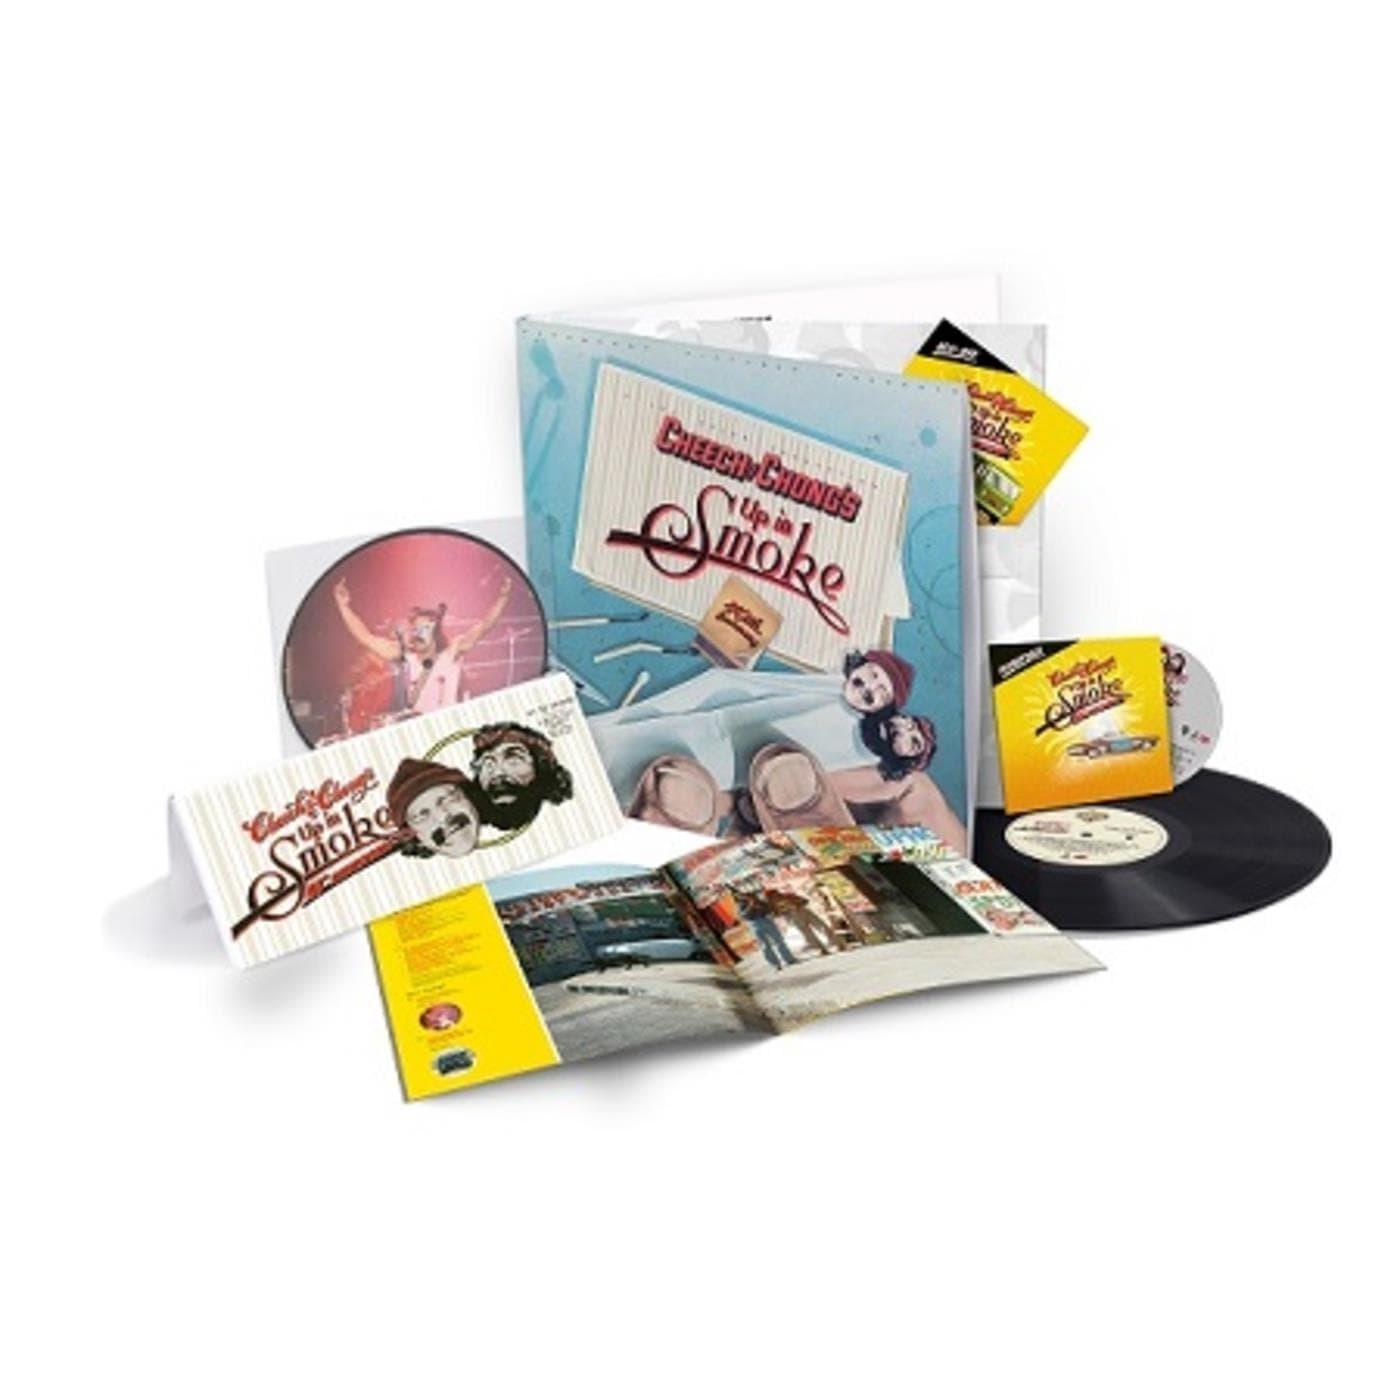 Cheech & Chong - Up In Smoke (40th Anniversary Deluxe Collection) - Joco Records